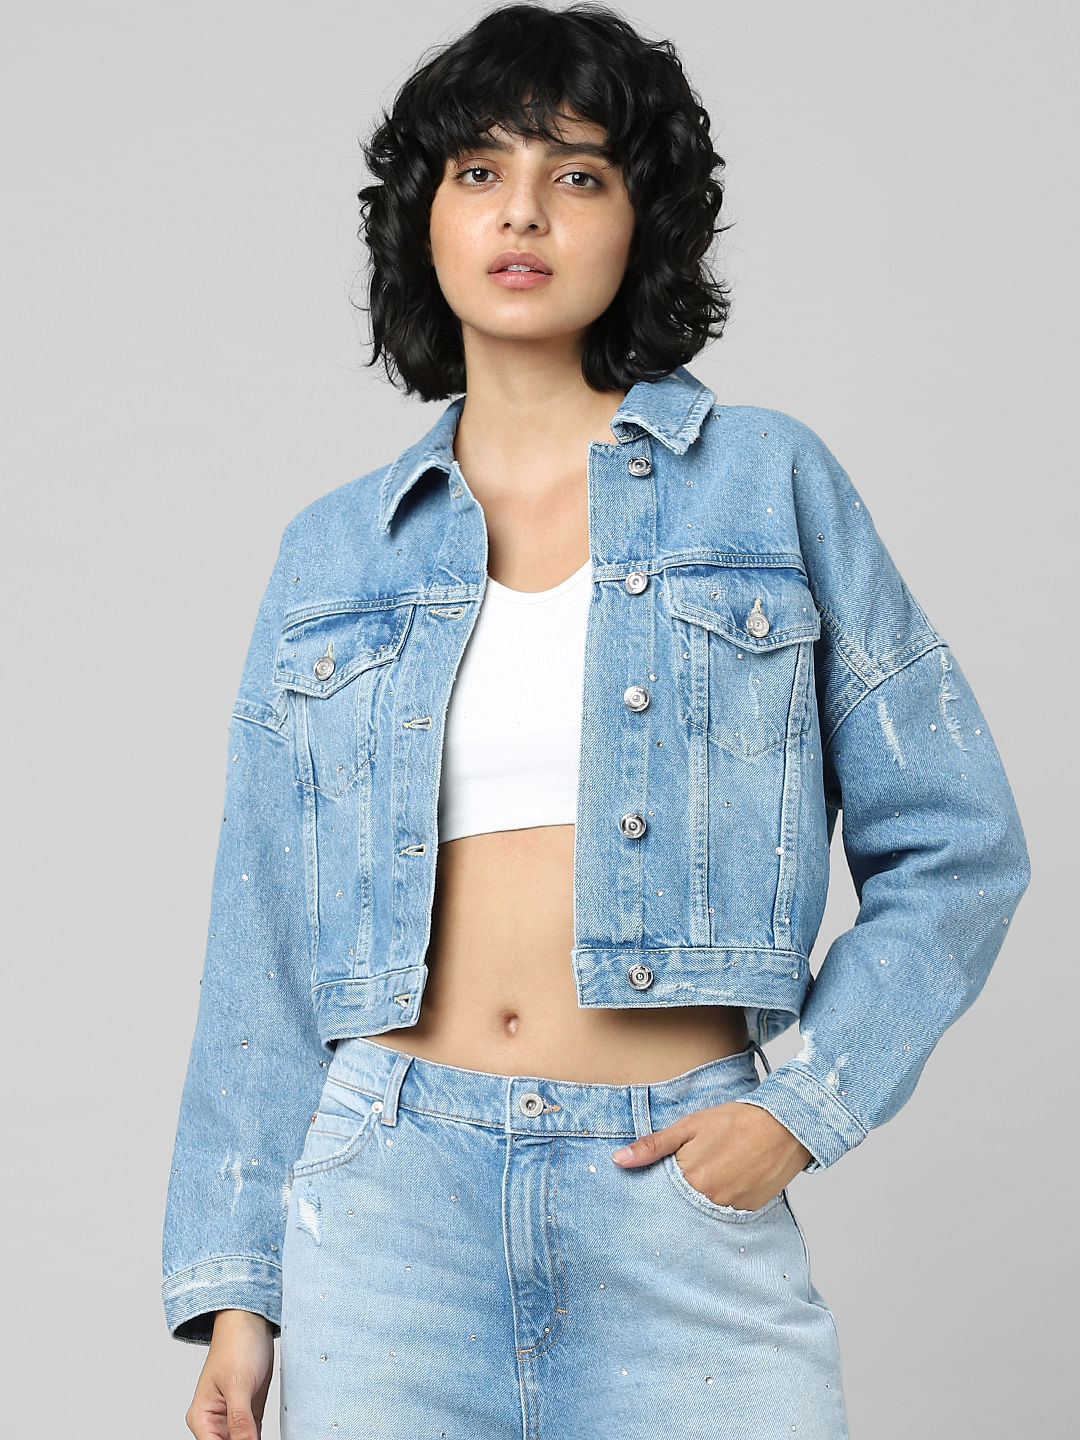 Crop top with denim jacket  Summer Outfits With Denim Jacket  Casual  wear Crop top Denim jacket